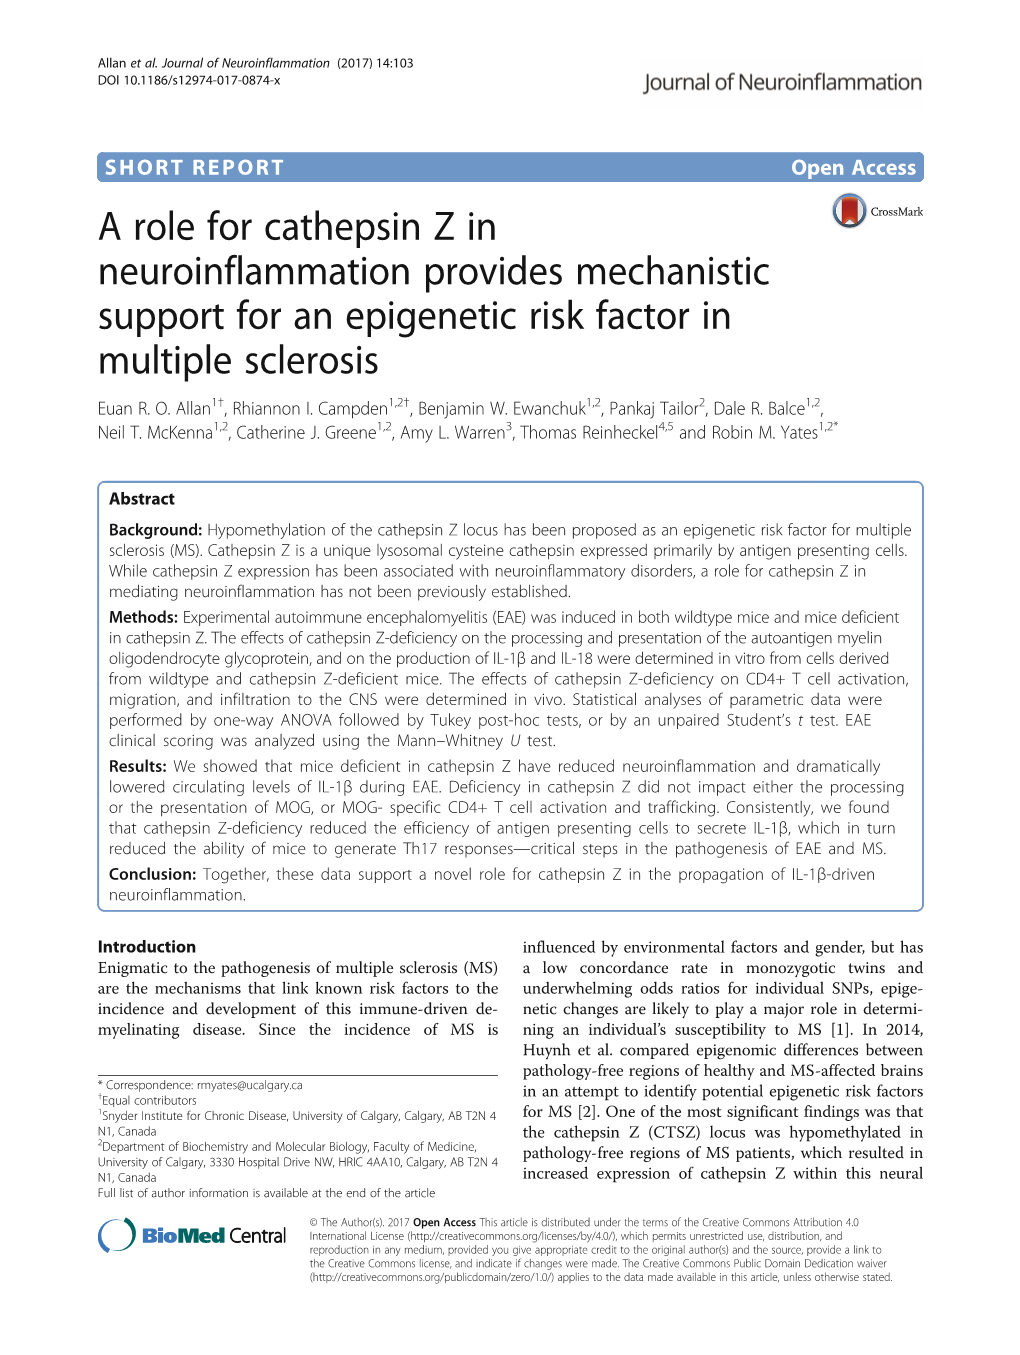 A Role for Cathepsin Z in Neuroinflammation Provides Mechanistic Support for an Epigenetic Risk Factor in Multiple Sclerosis Euan R